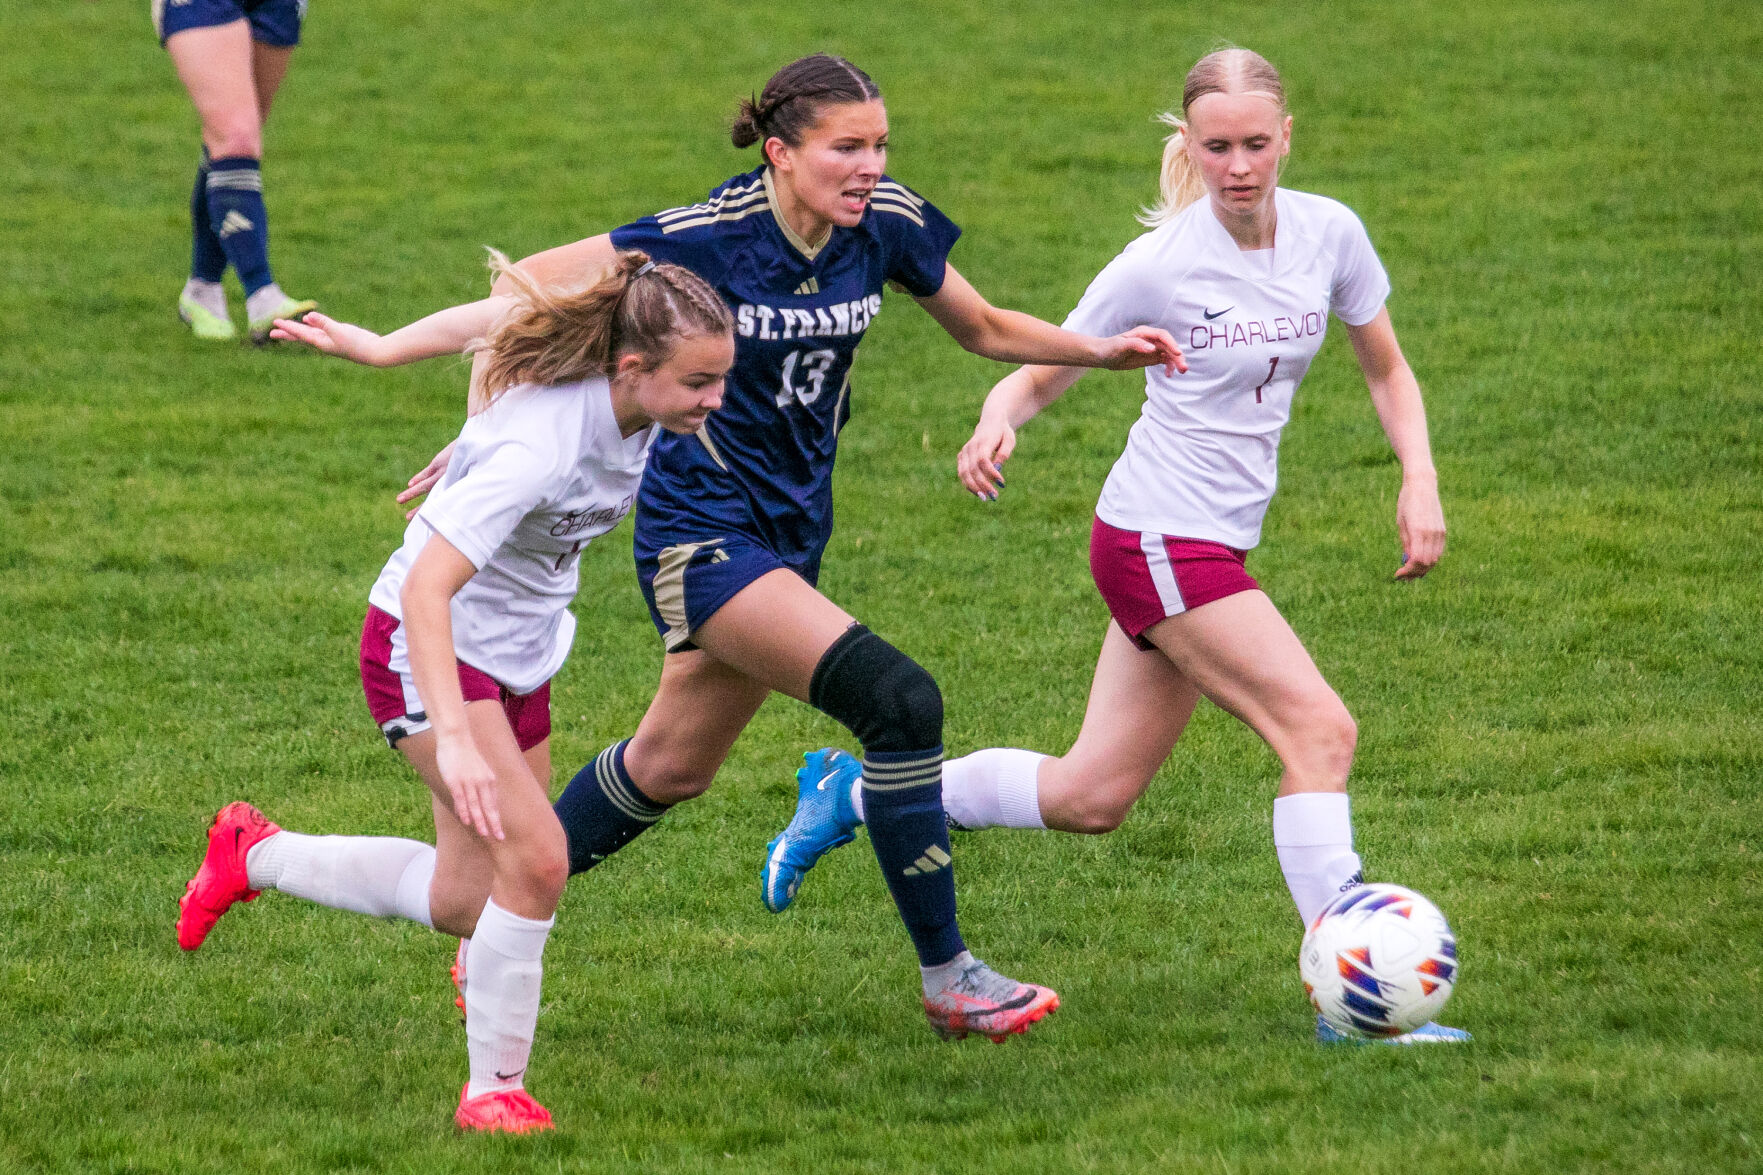 Traverse City St. Francis Defense Guides Gladiators to Victory with Lilianna David’s Two Goals